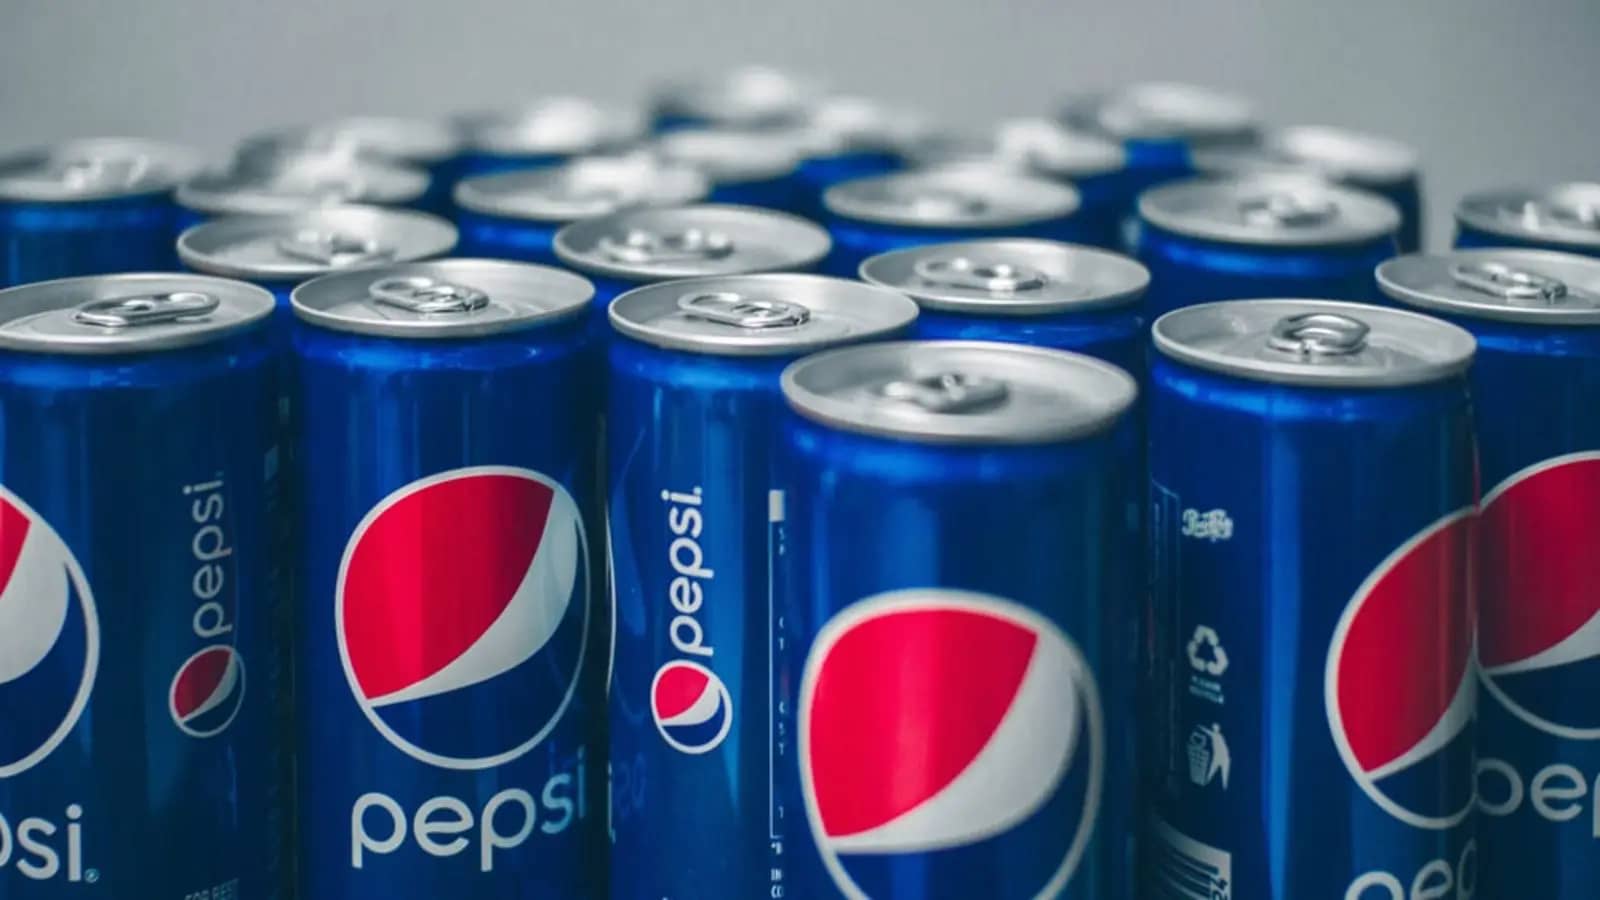 PepsiCo SA’s employees own part of company through newly launched share ownership plan